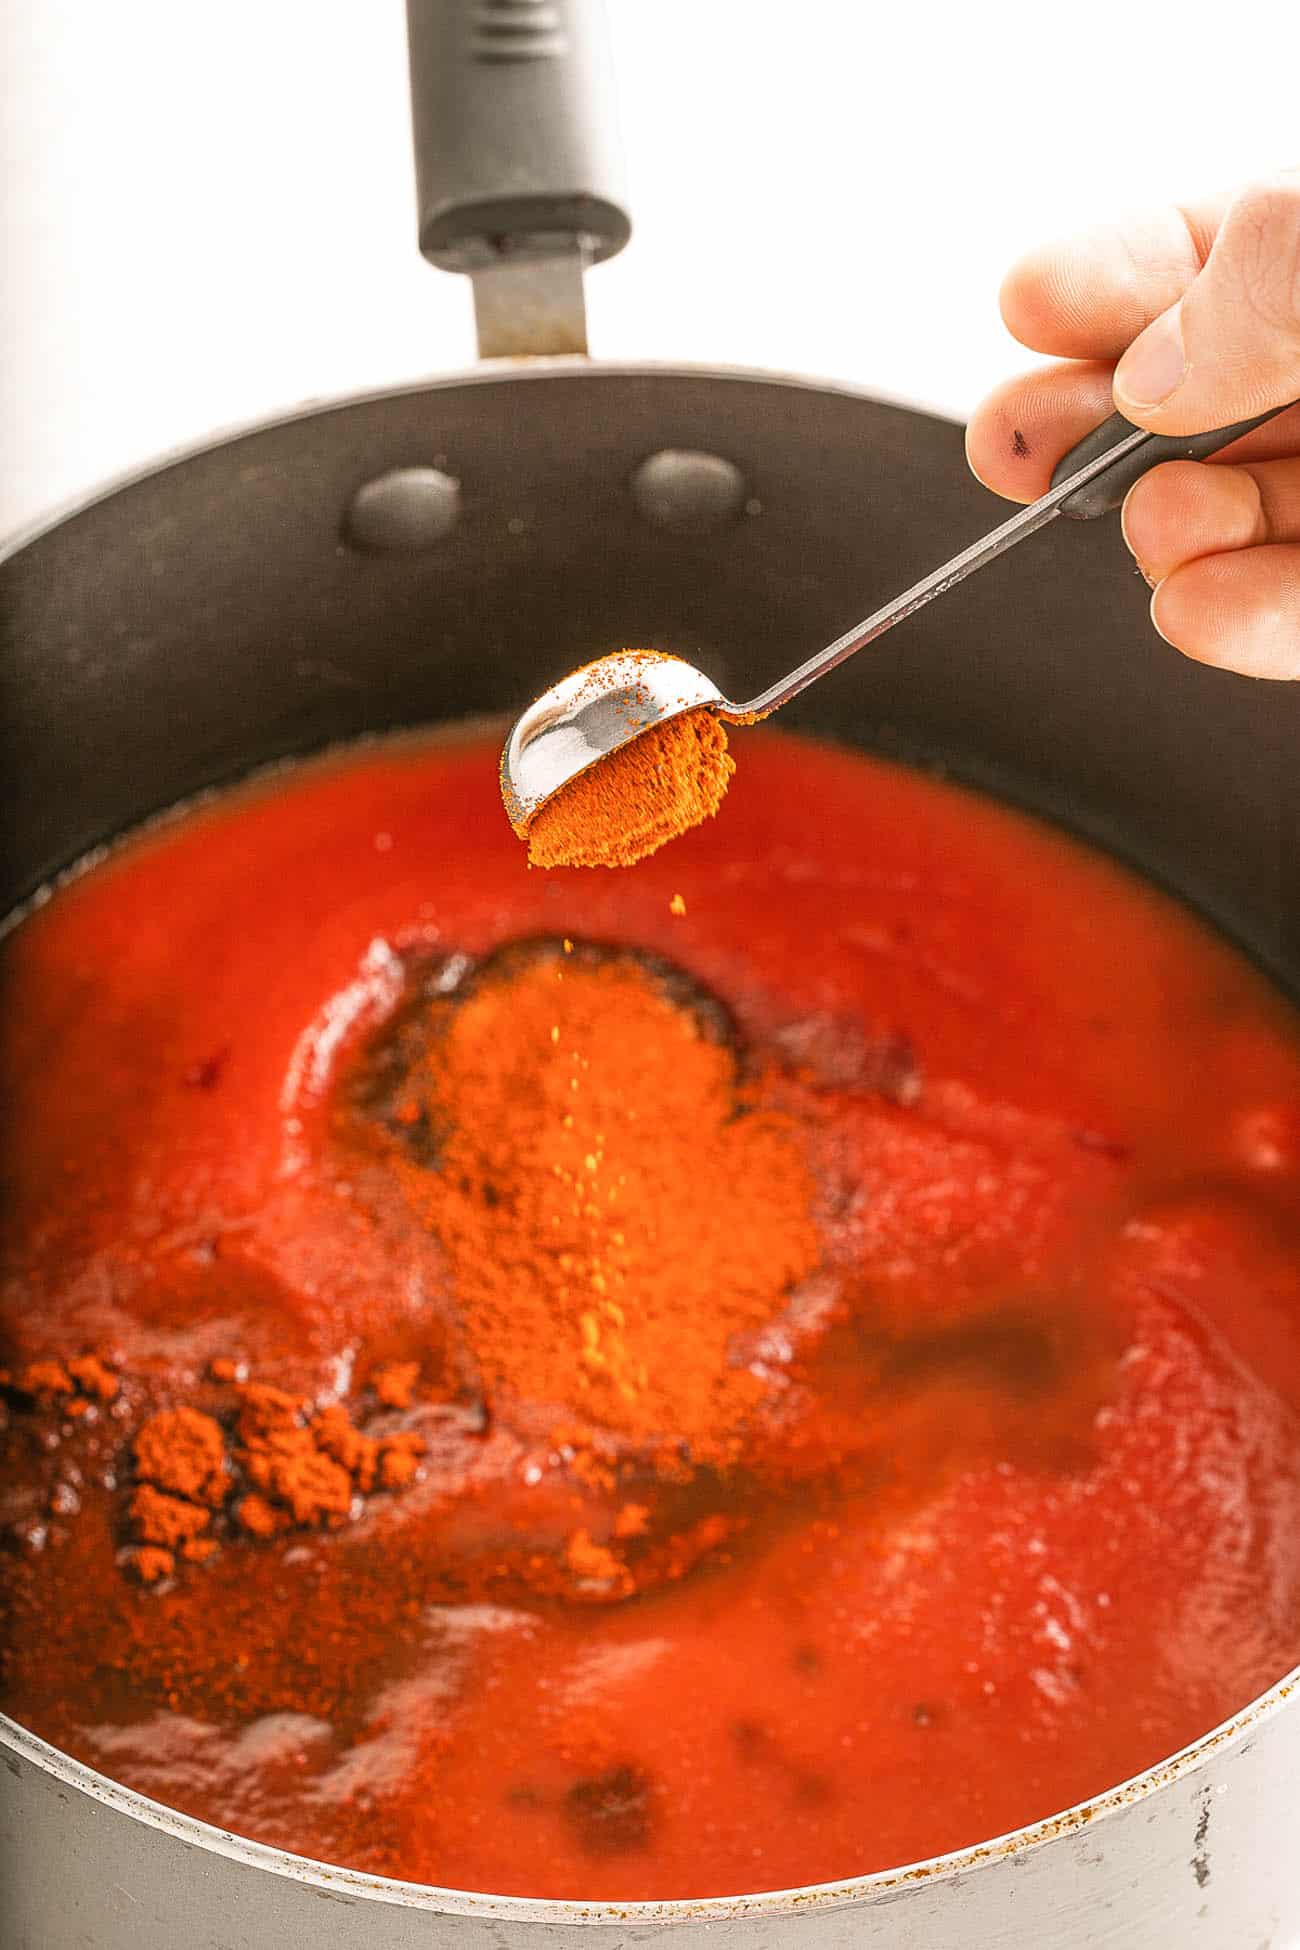 tomato sauce and spices in a pot